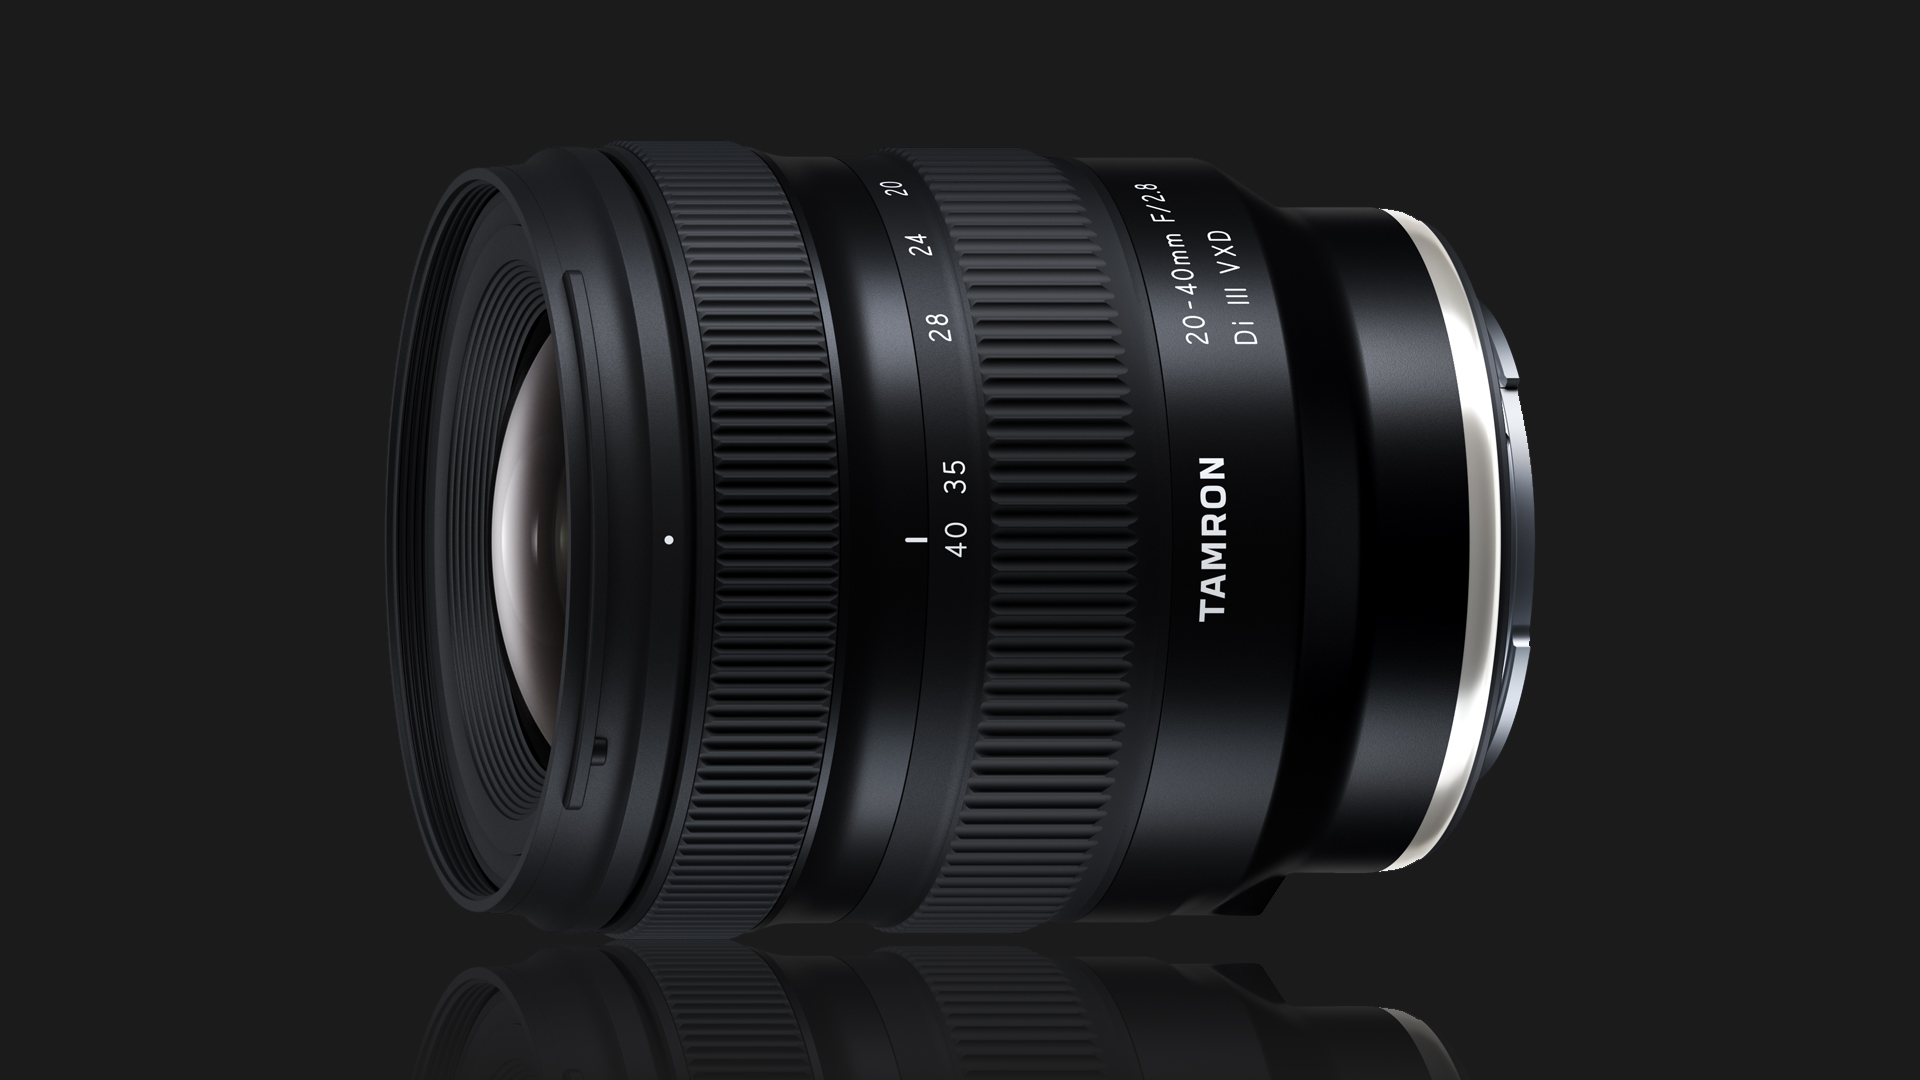 The Tamron 20-40mm F/2.8 Di III VXD Lens for Sony E - Mount is here